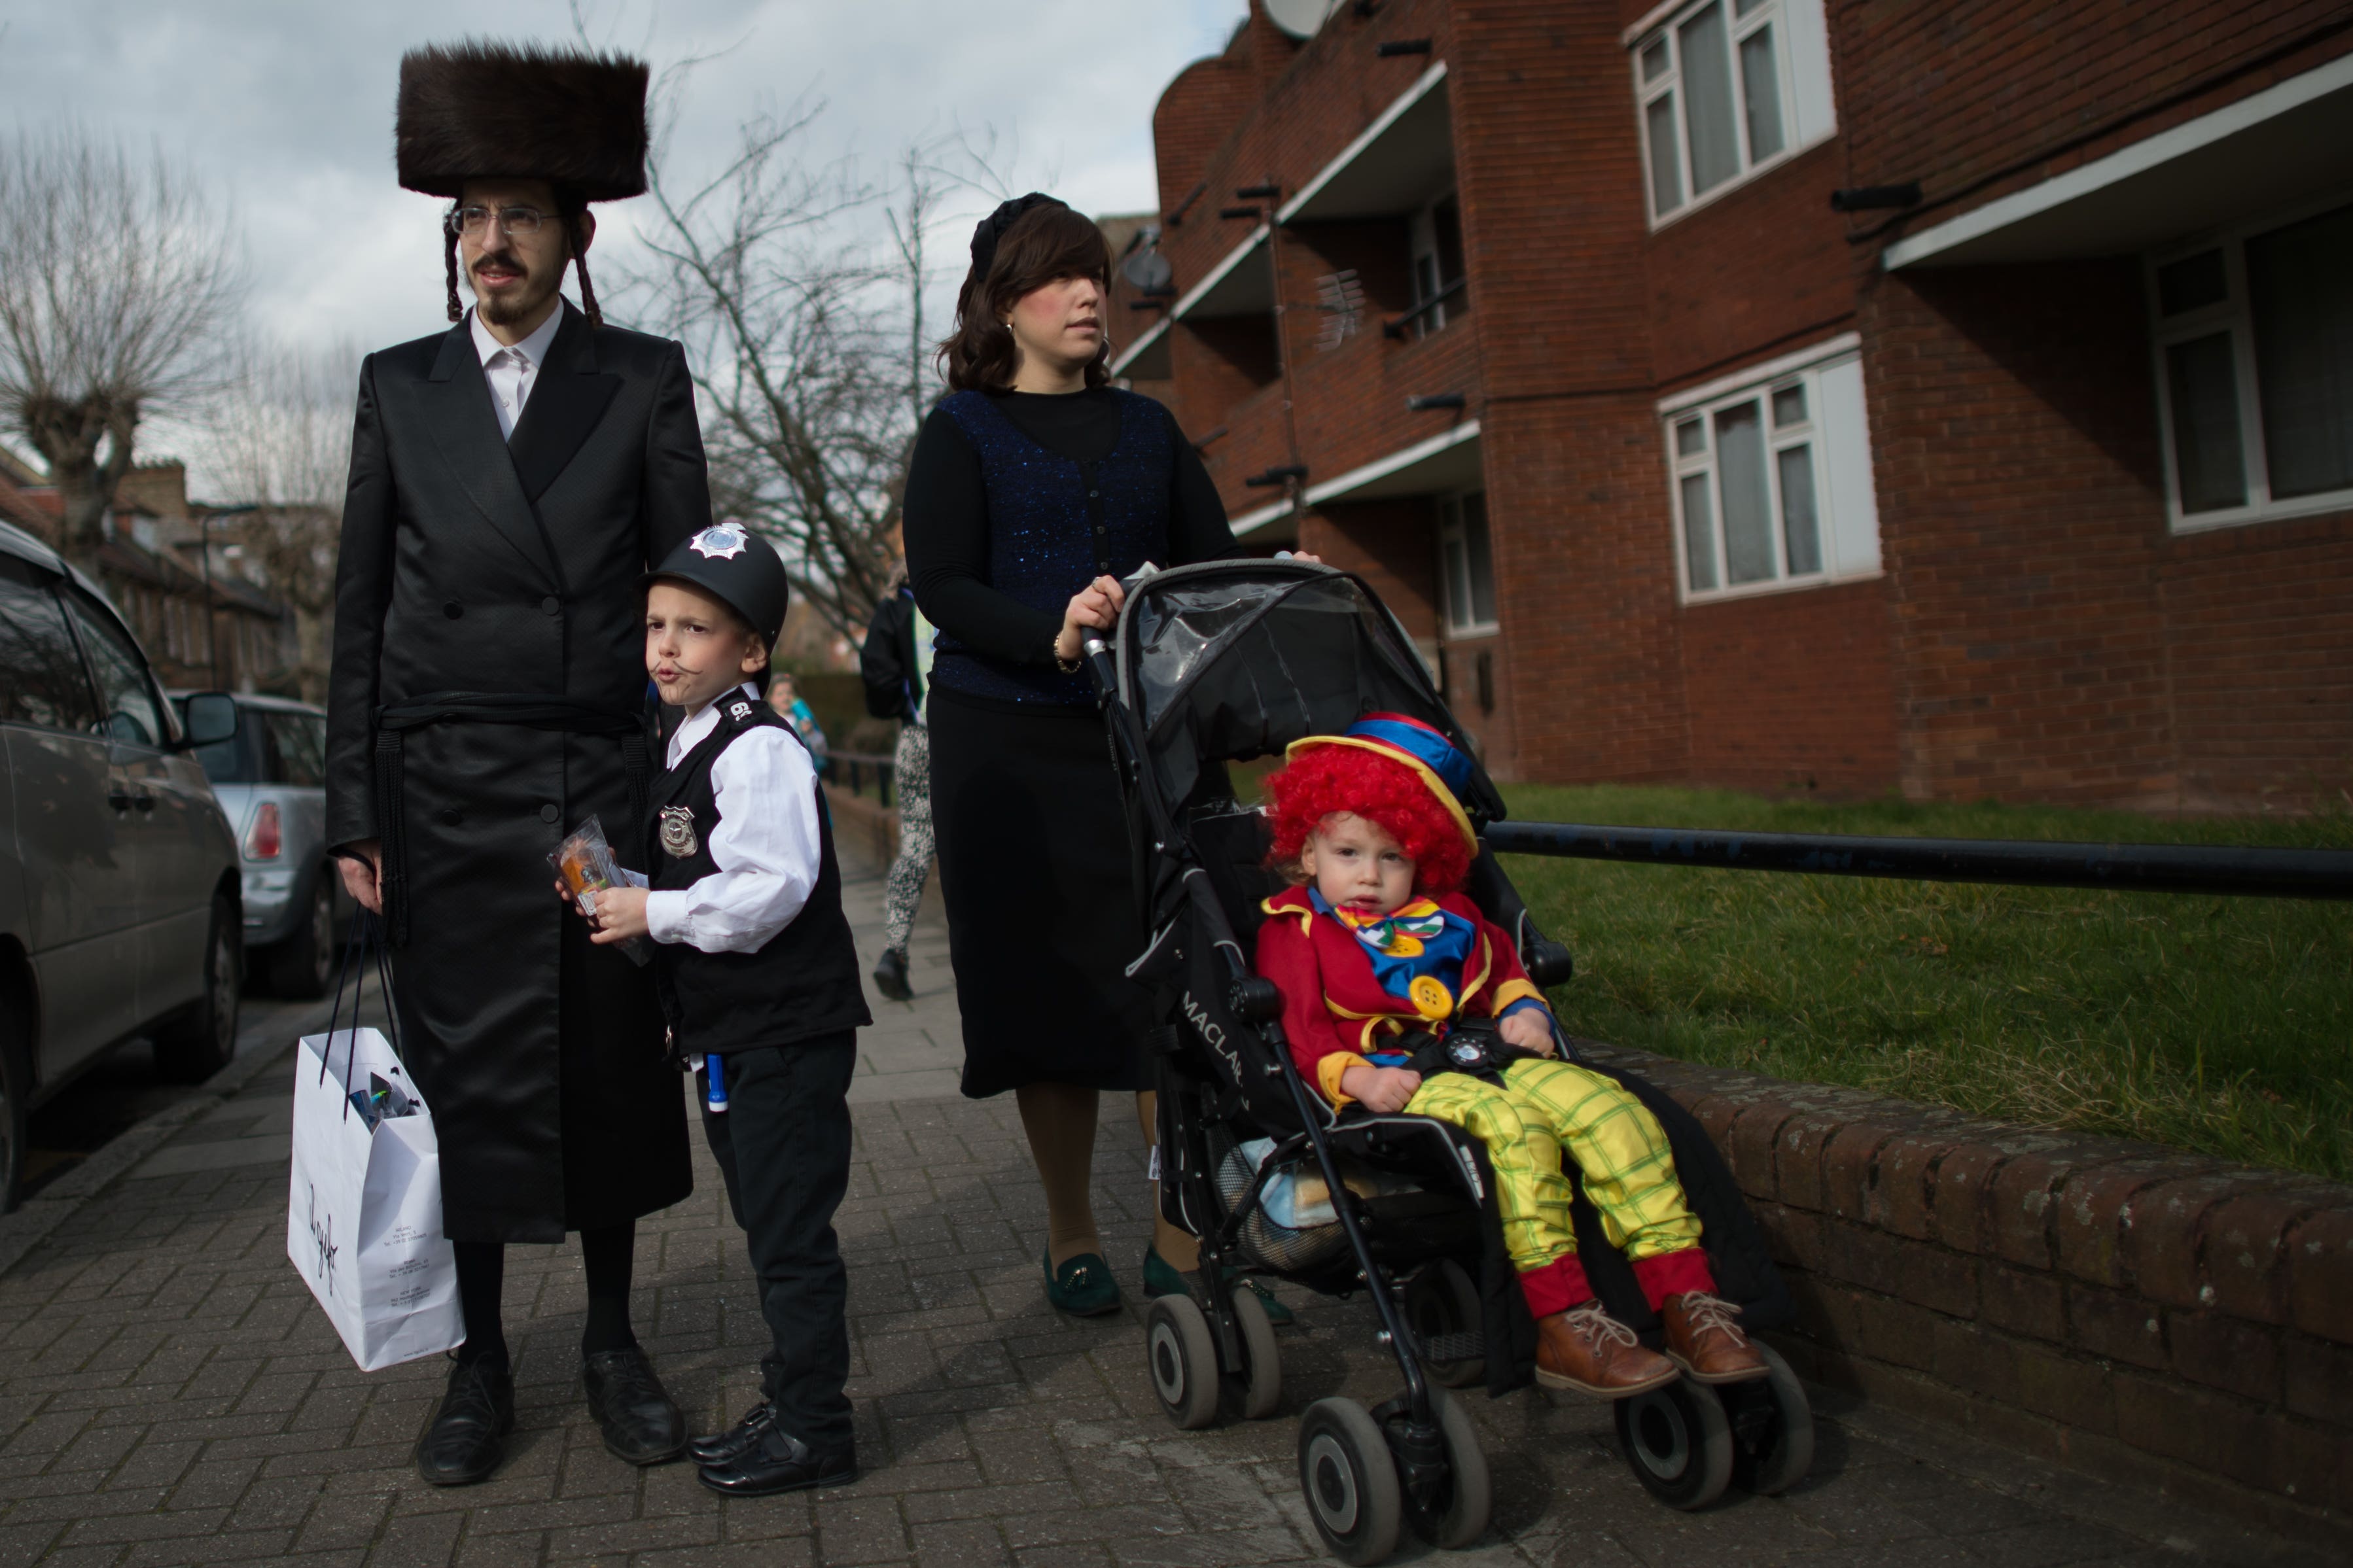 An IDF spokesman said he was ‘troubled’ by reports of antisemitism in Britain (Stefan Rousseau/PA)